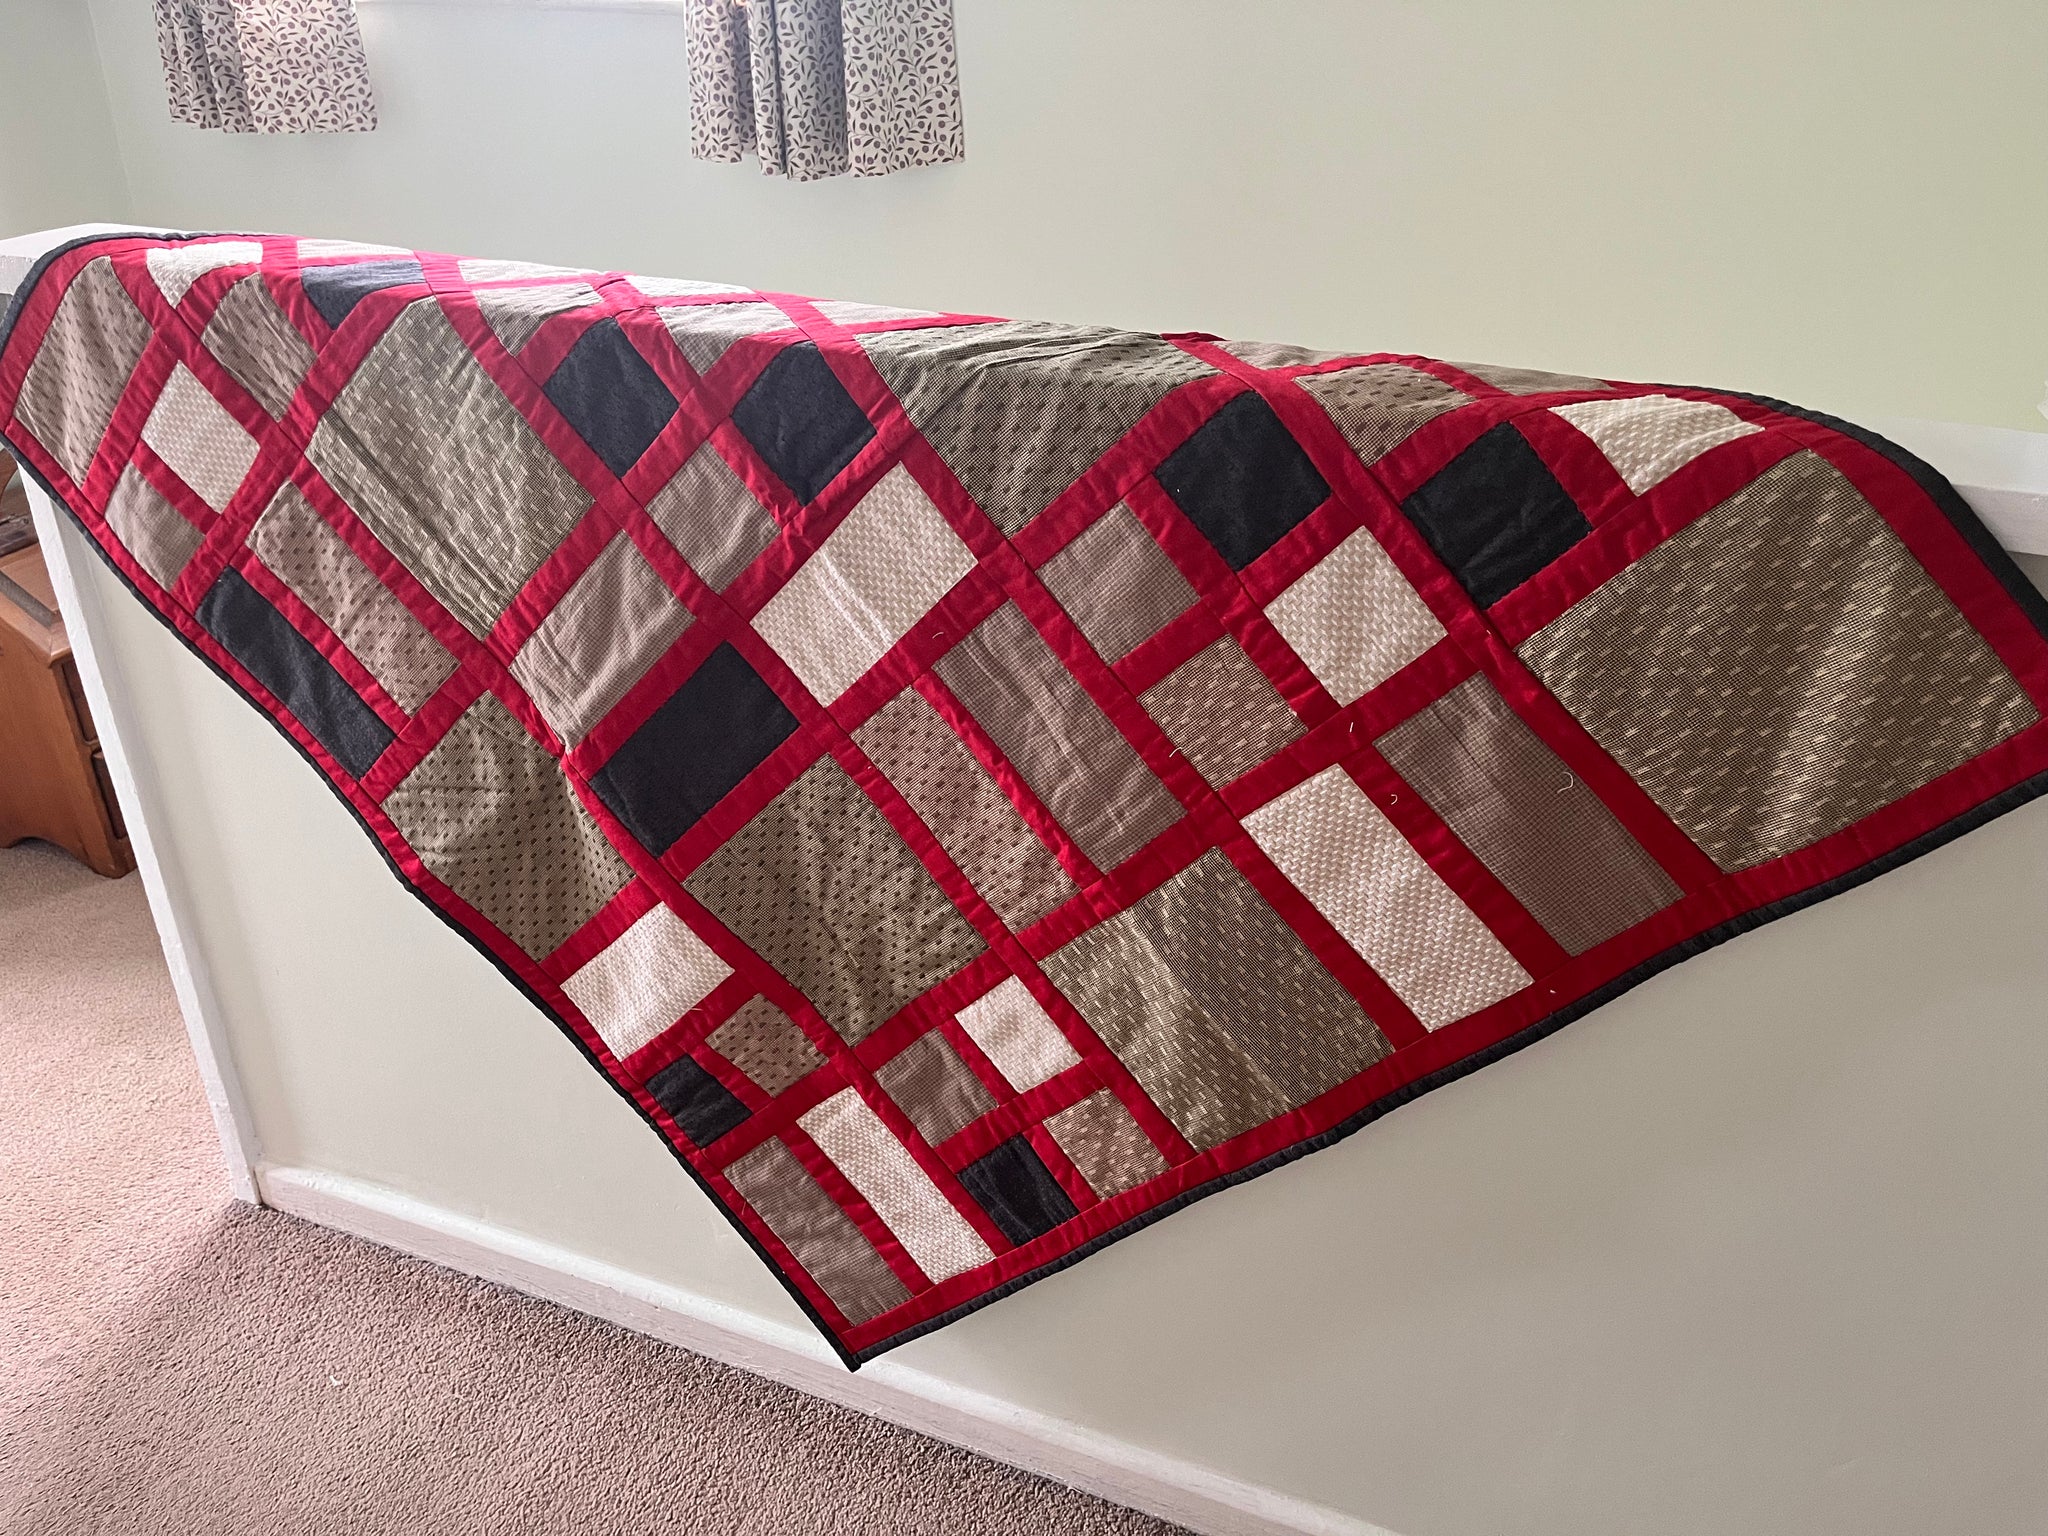 Red Brick - Ready Made Quilt/Throw - 40" x 40"